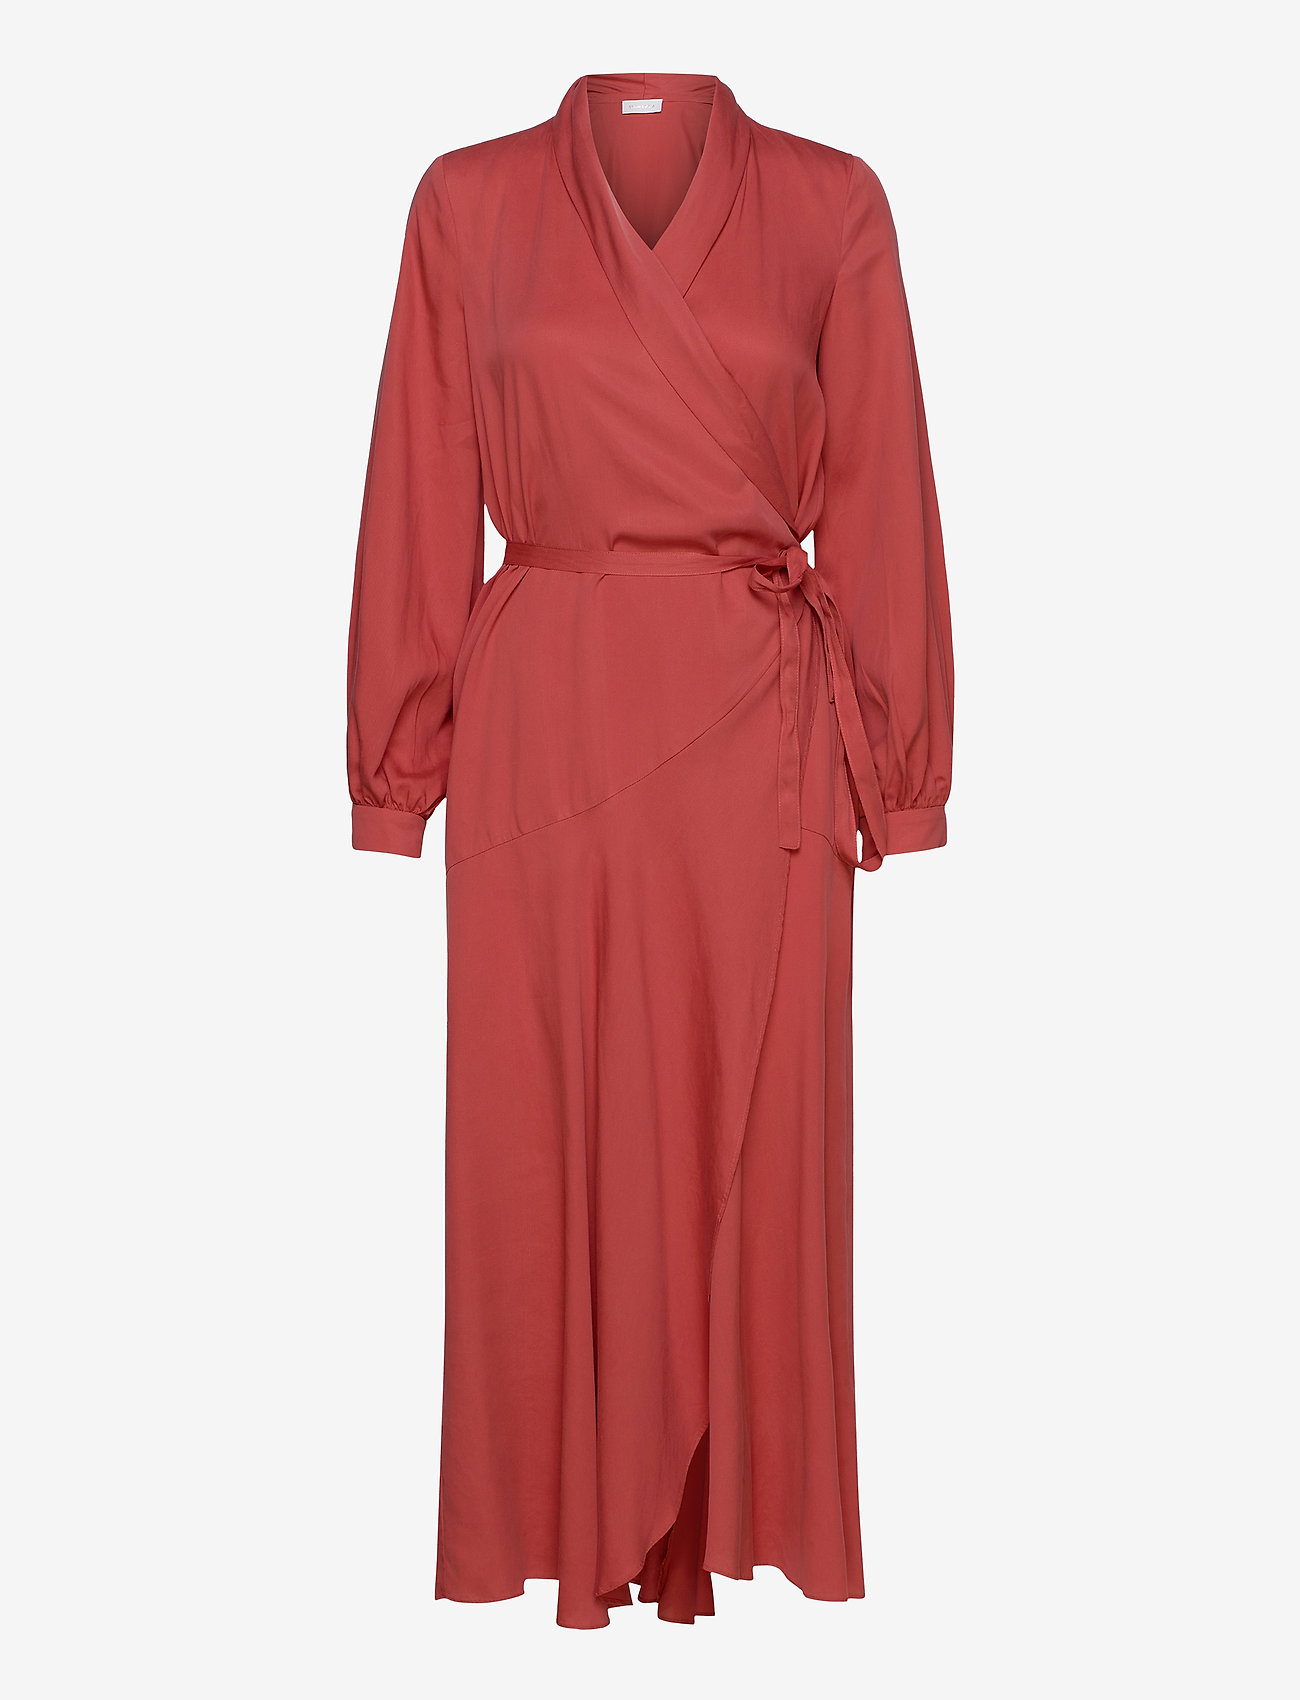 Storm \u0026 Marie Olivia Wrap Dress (Burnt Sienna), (138 €) | Large selection  of outlet-styles | Booztlet.com